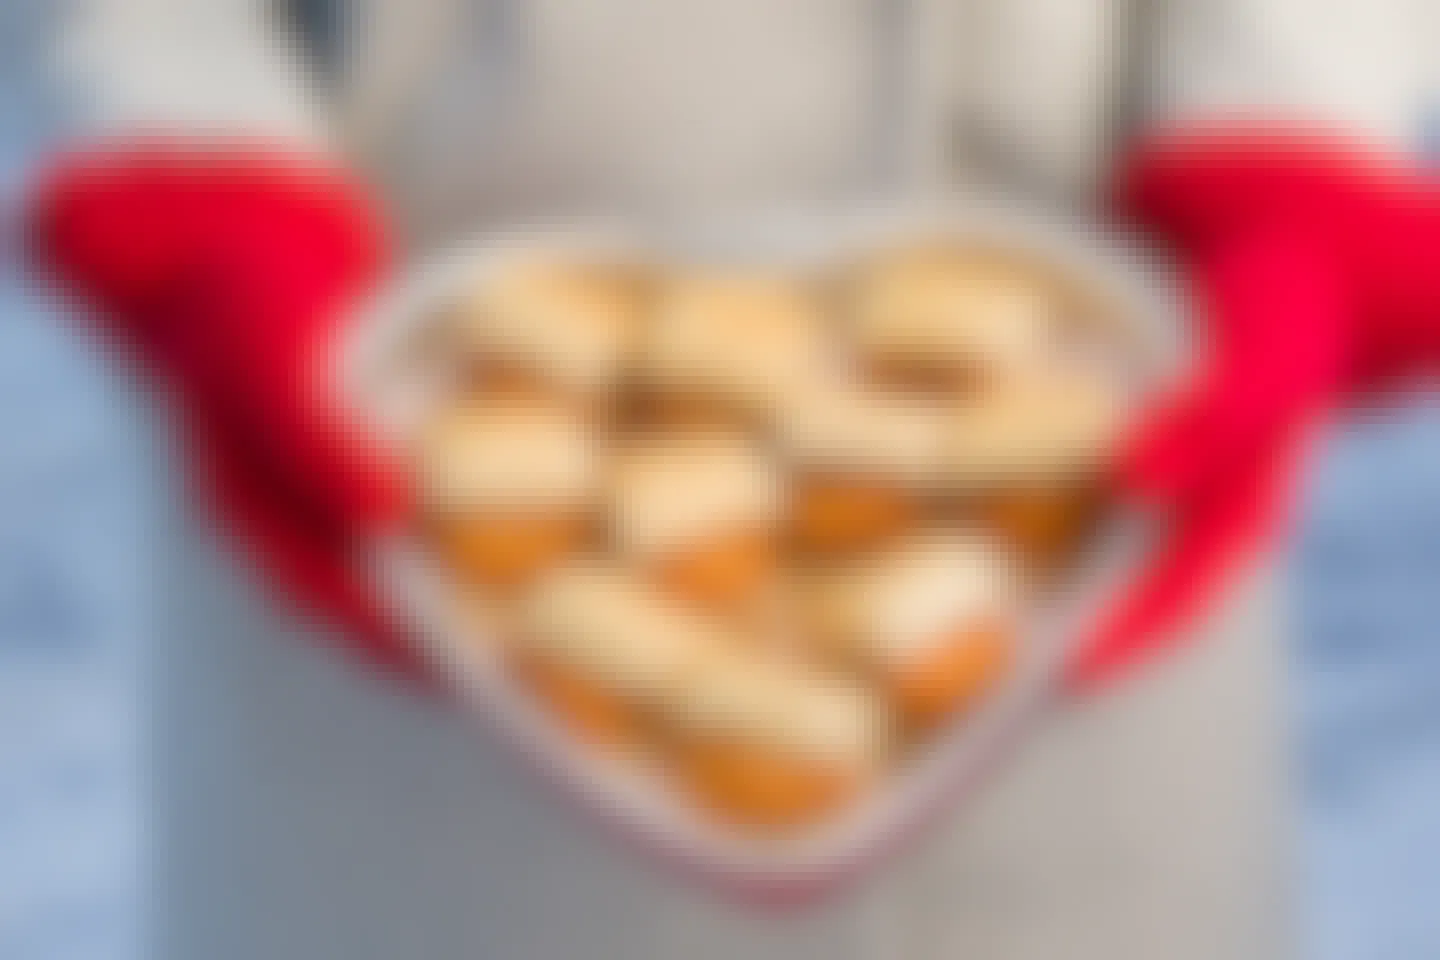 Person with mittens on holding a heart shaped tray of chicken biscuits from Chick-Fil-A